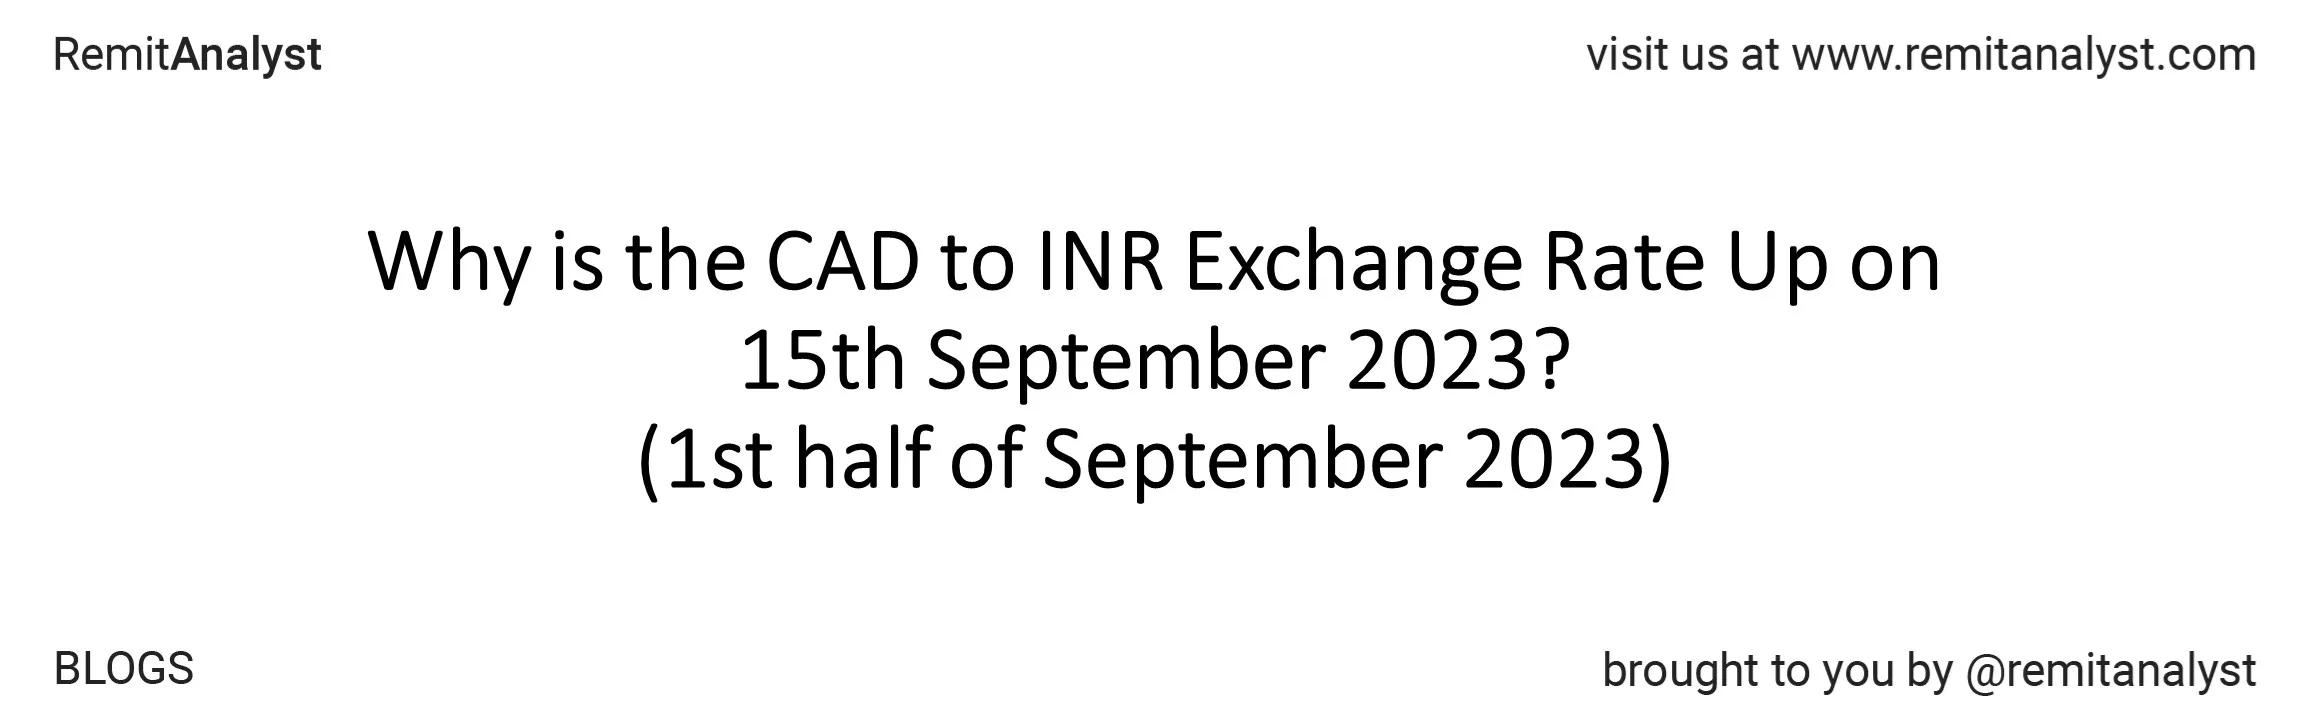 cad-to-inr-exchange-rate-from-1-sep-2023-to-15-sep-2023-title